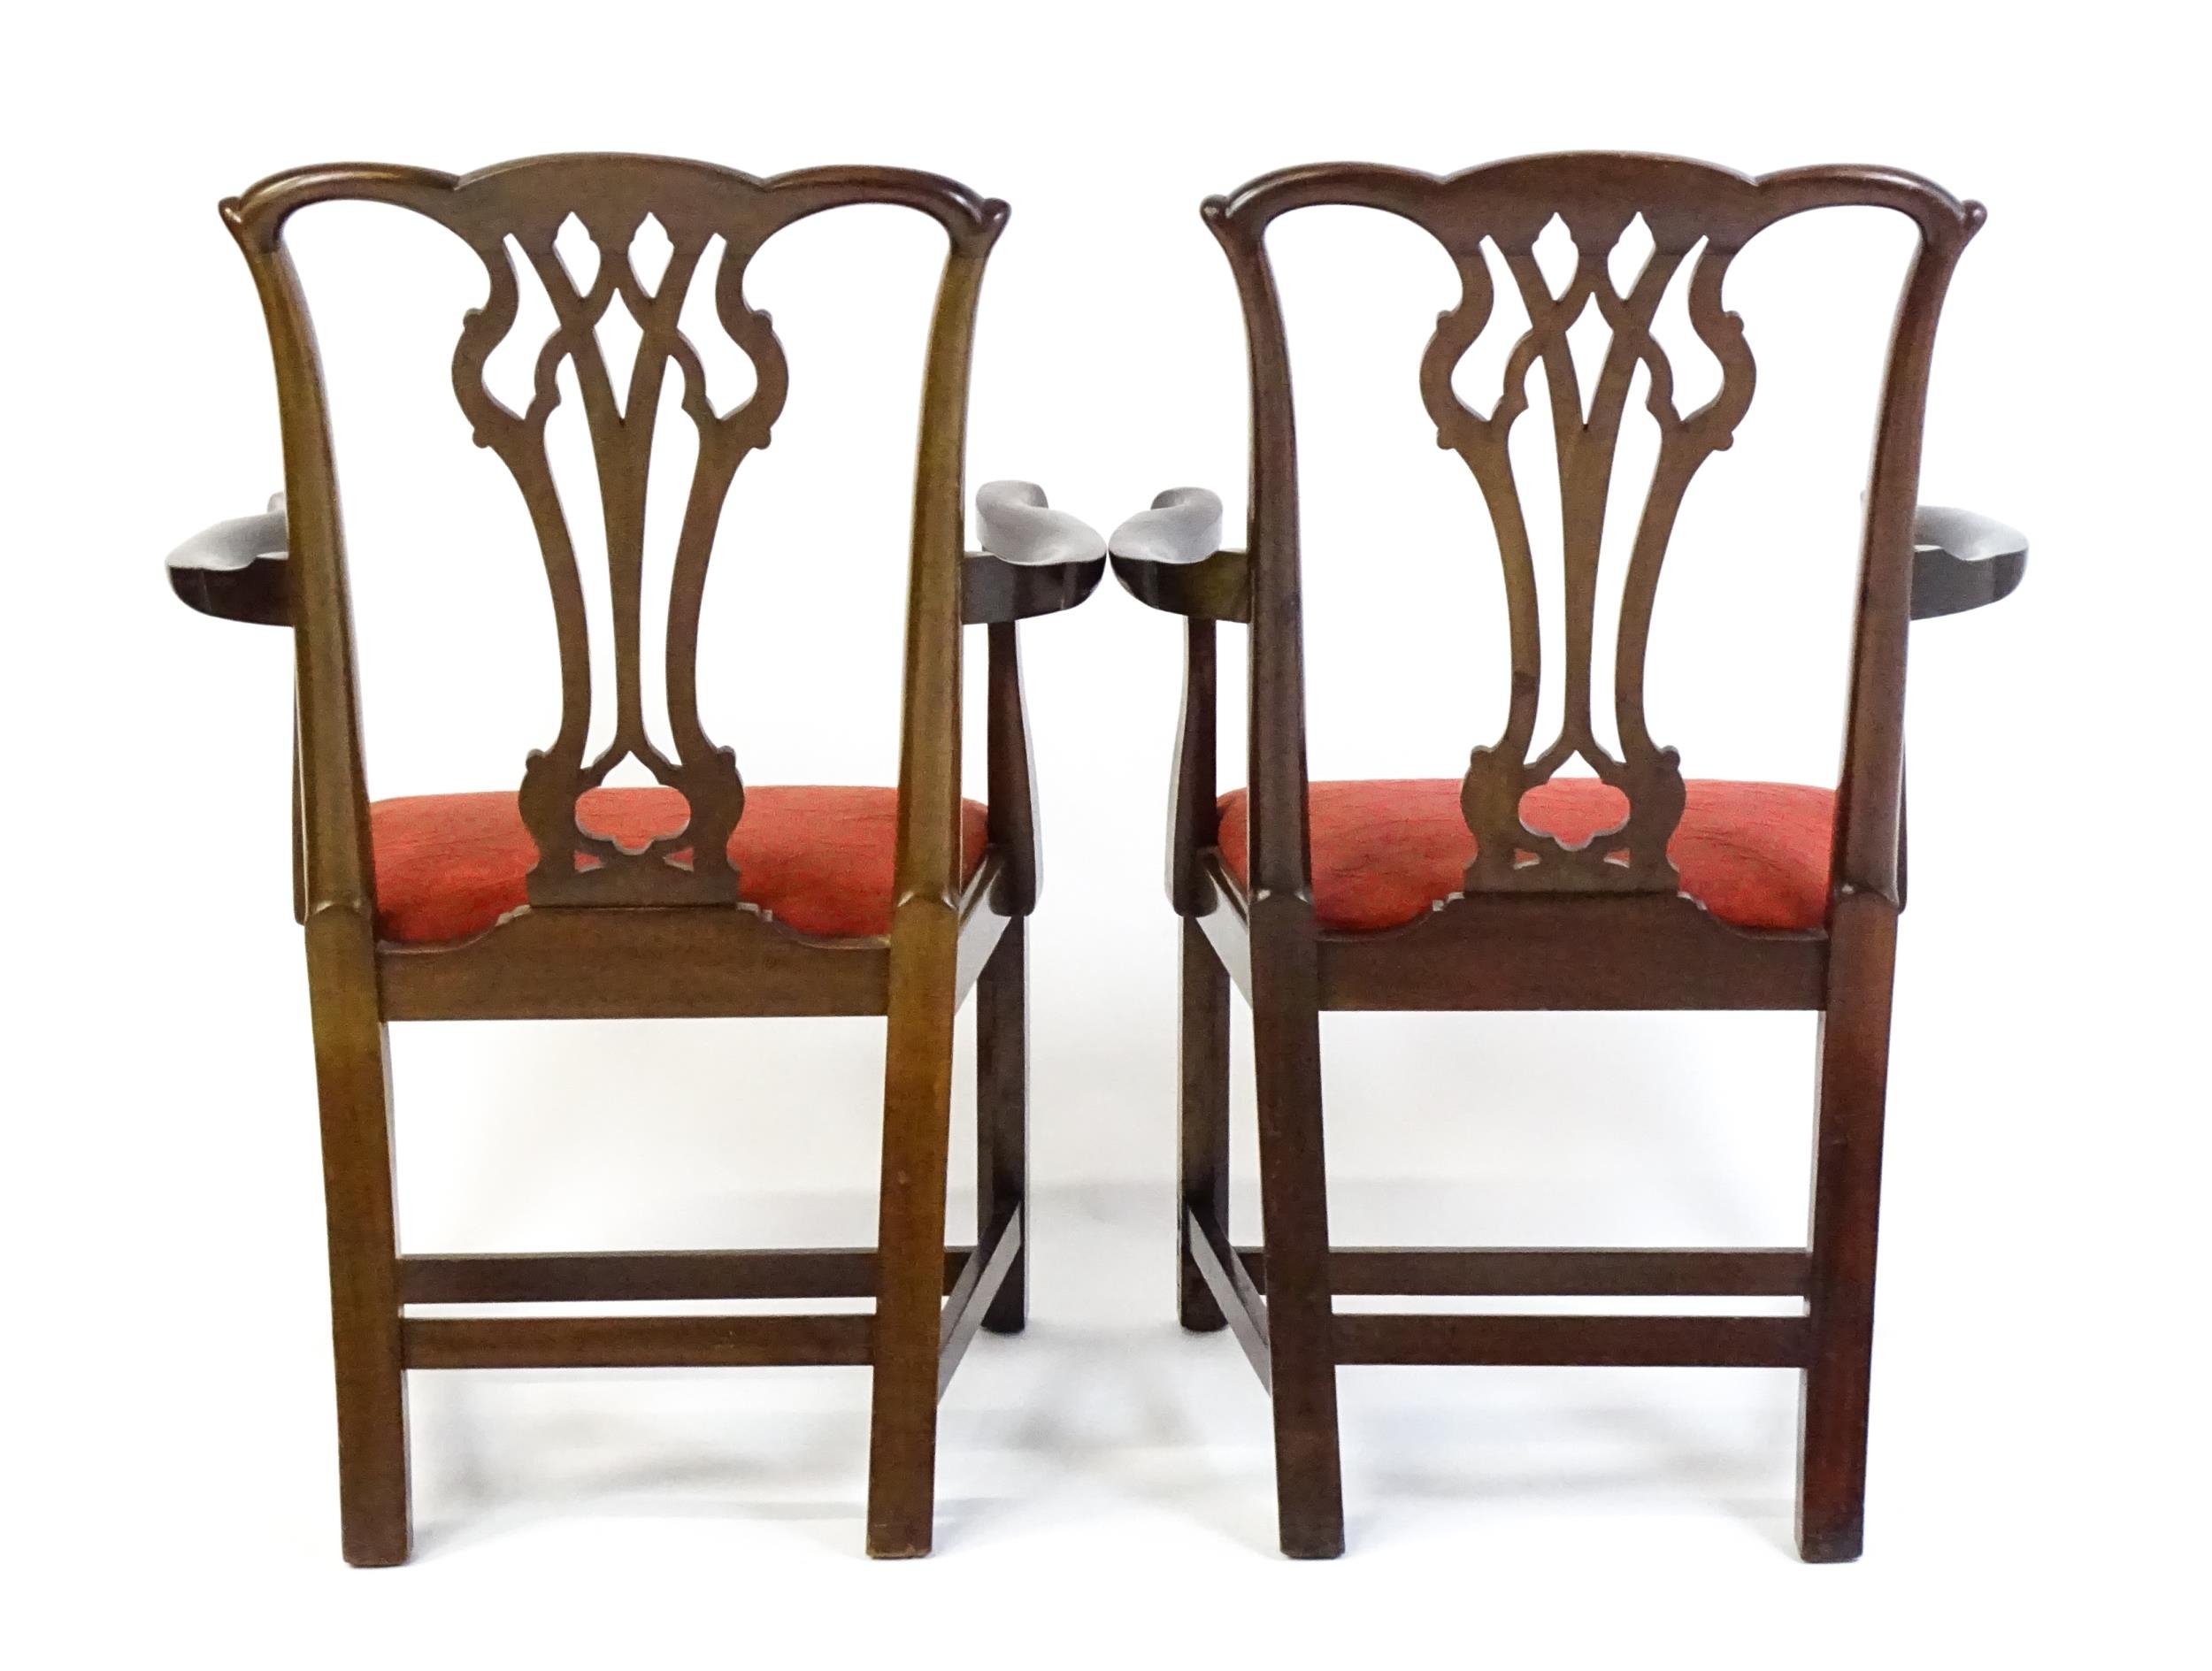 A pair of Chippendale style mahogany elbow chairs with a drop in seat raised on chamfered legs - Image 7 of 7